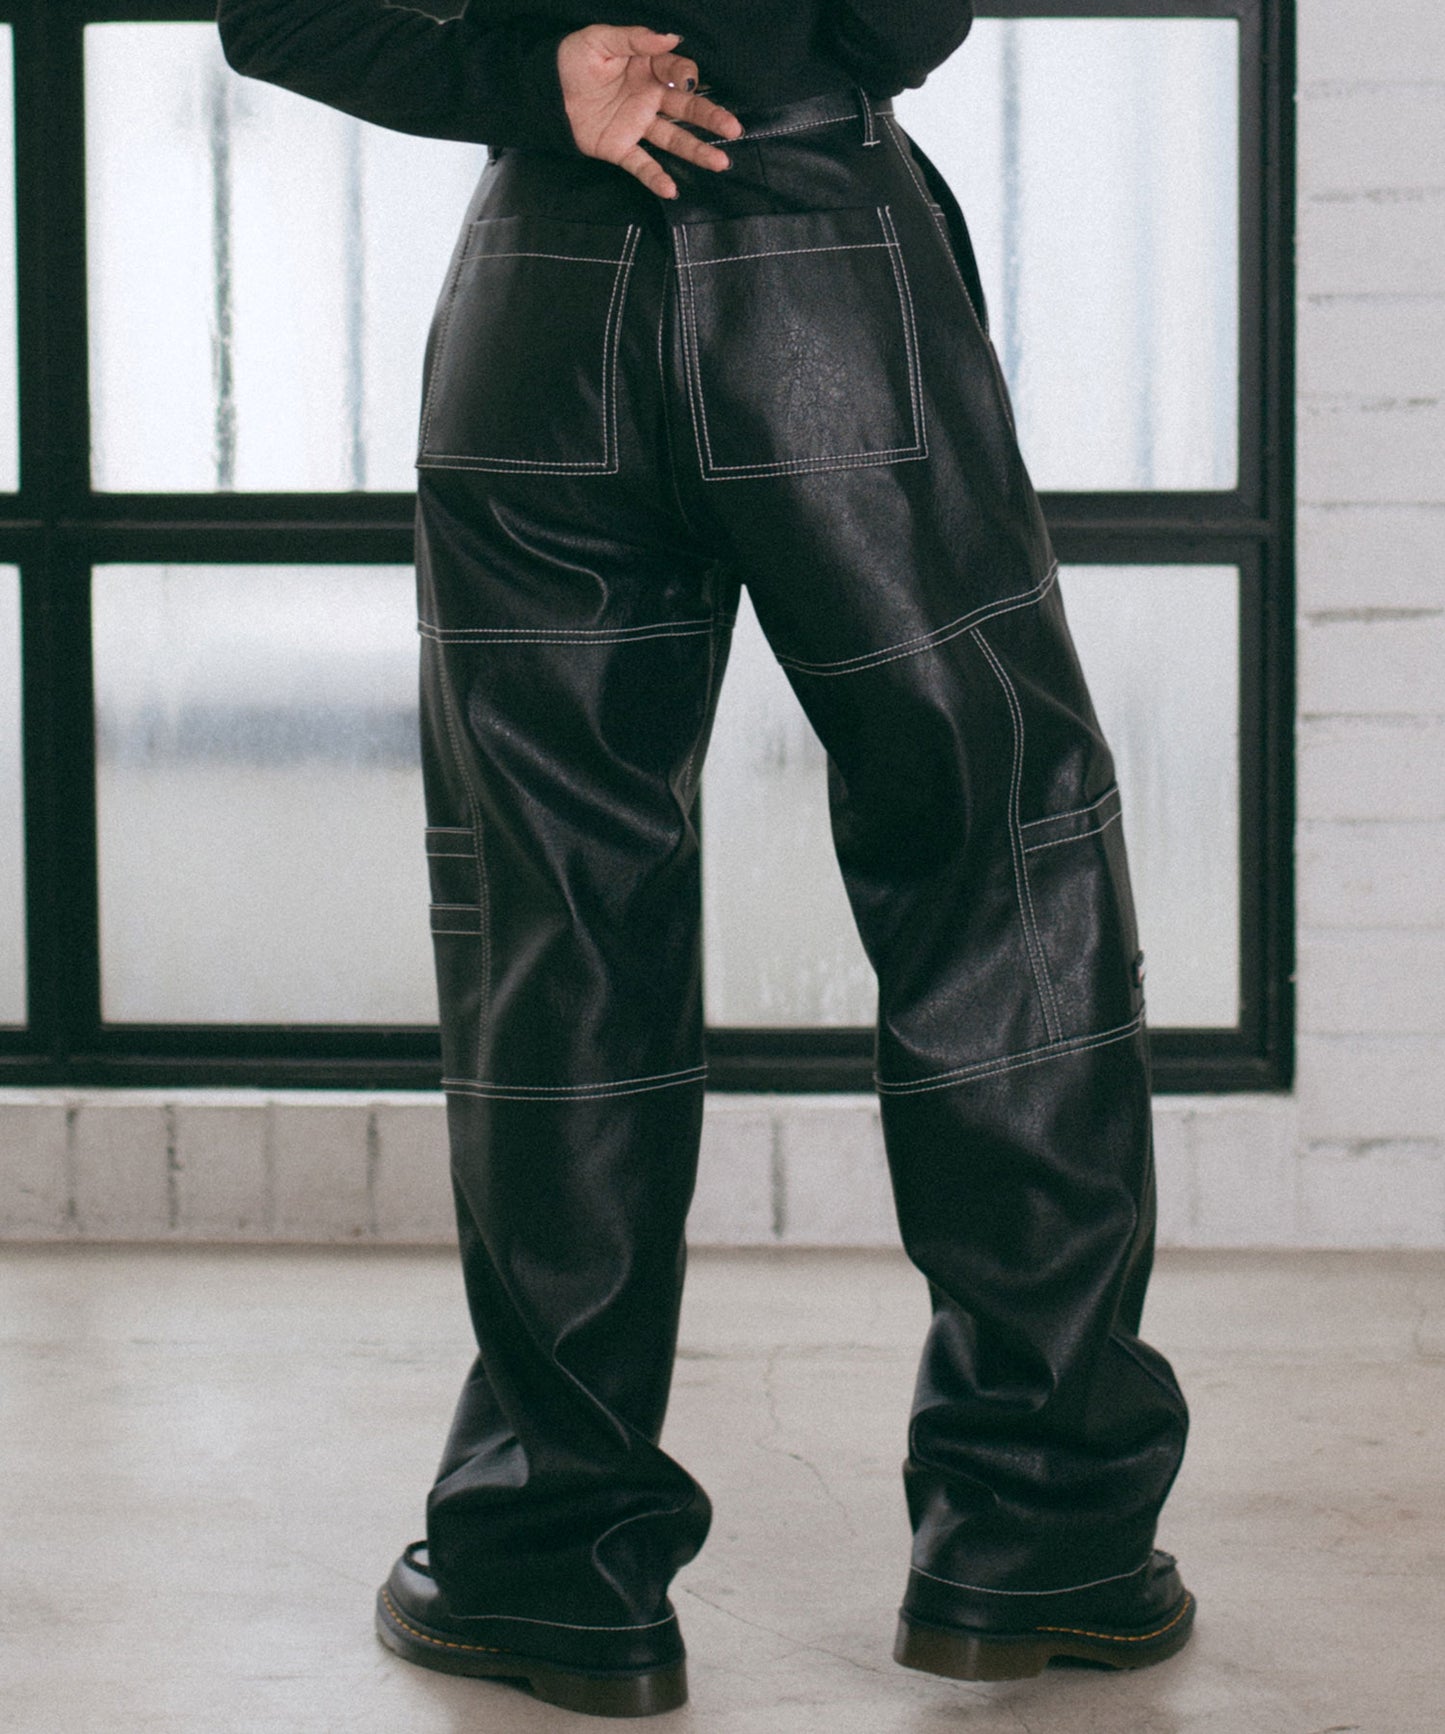 LEATHER WORK PANTS